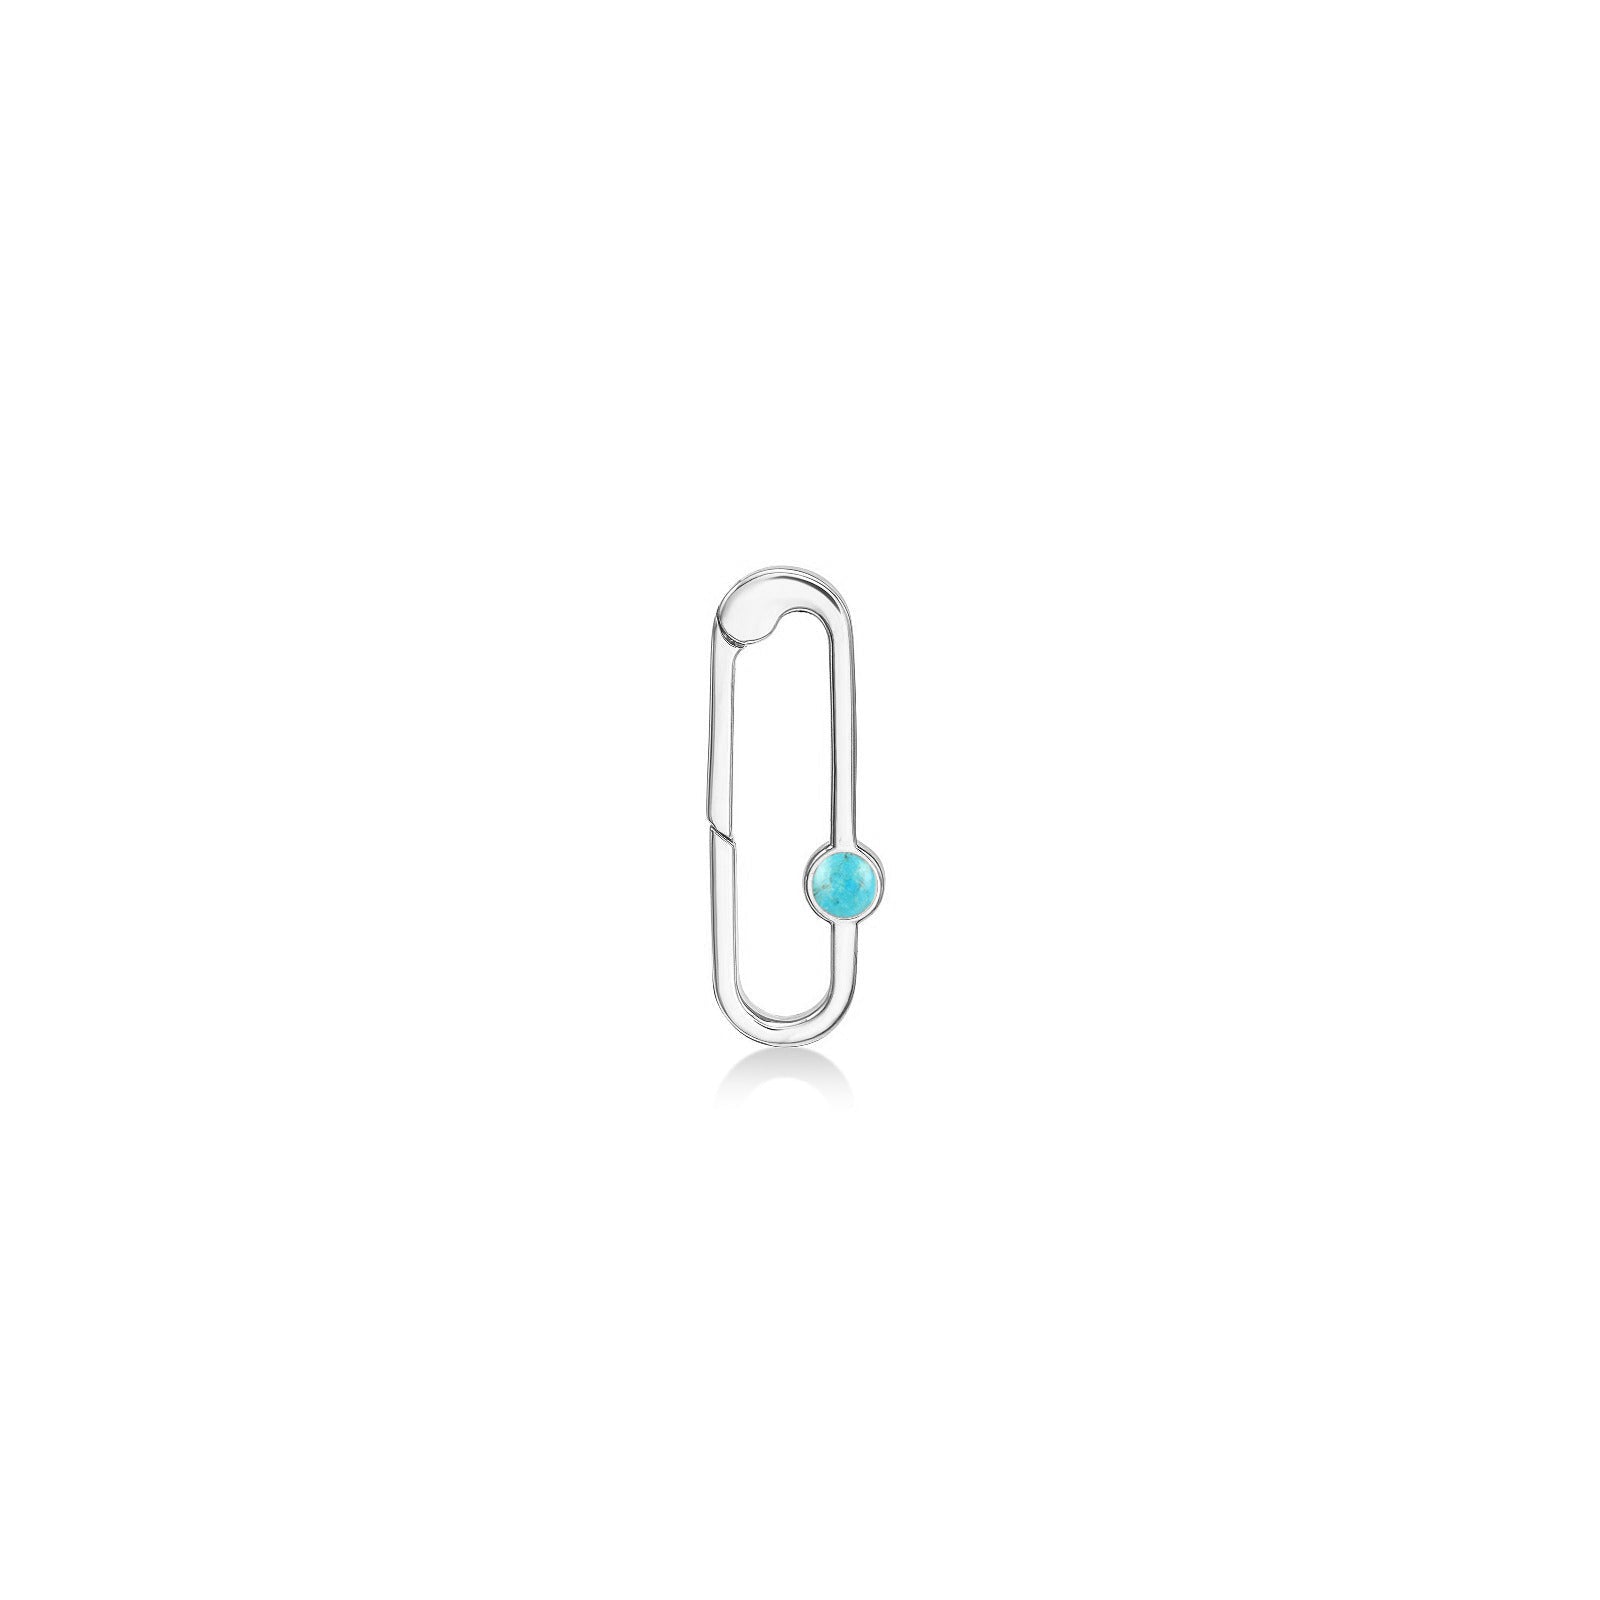 14k white gold paperclip charm lock with turquoise